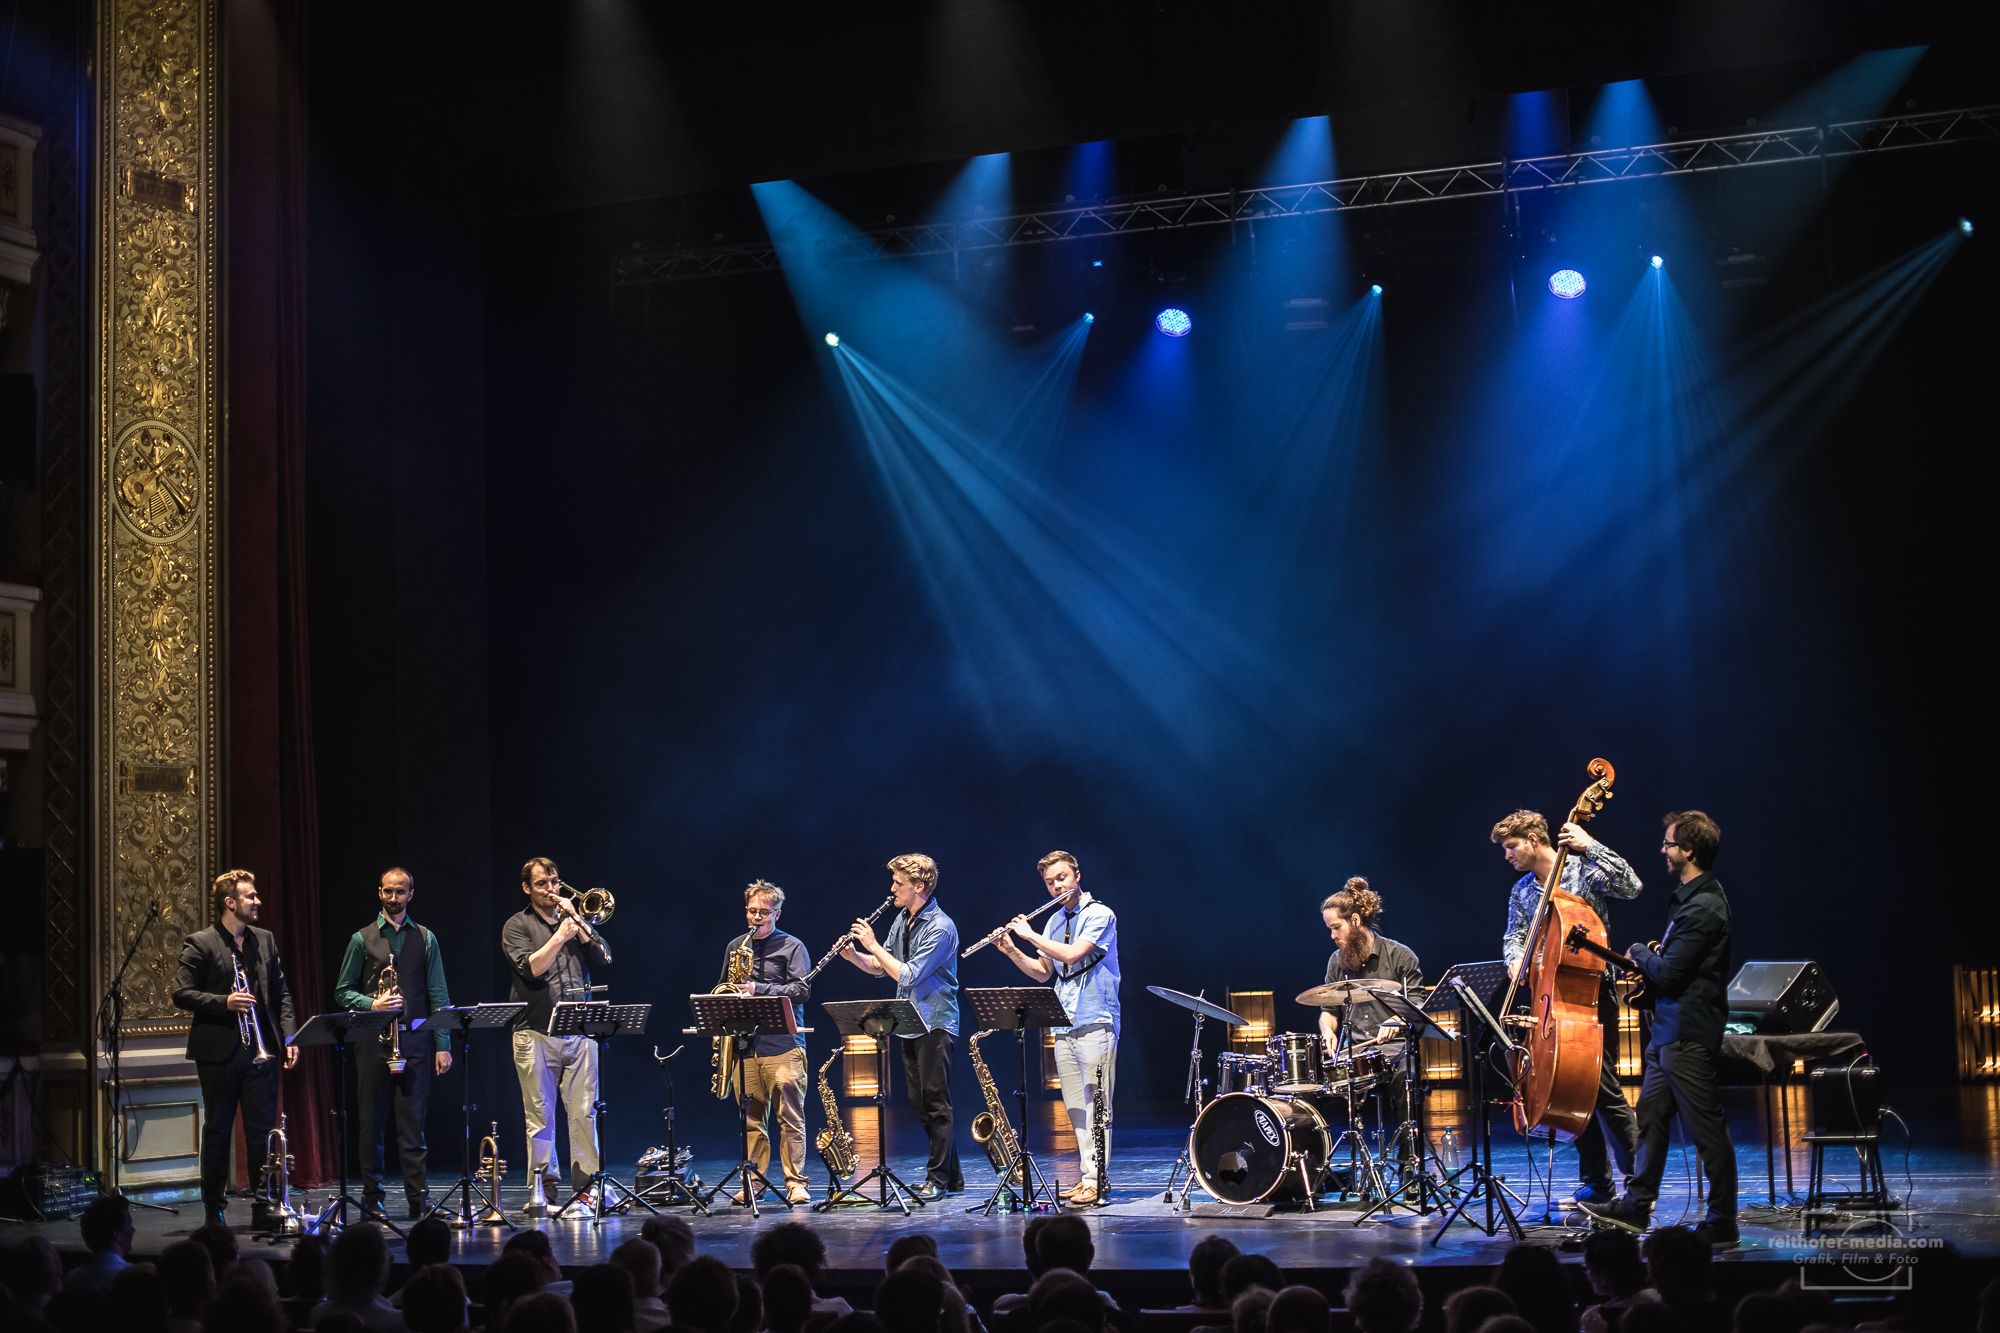 Nonet Mereneu Project
Emiliano Sampaio has lived in Austria since 2012 and founded the Nonet Mereneu Project with top musicians from the Austrian scene back then. 